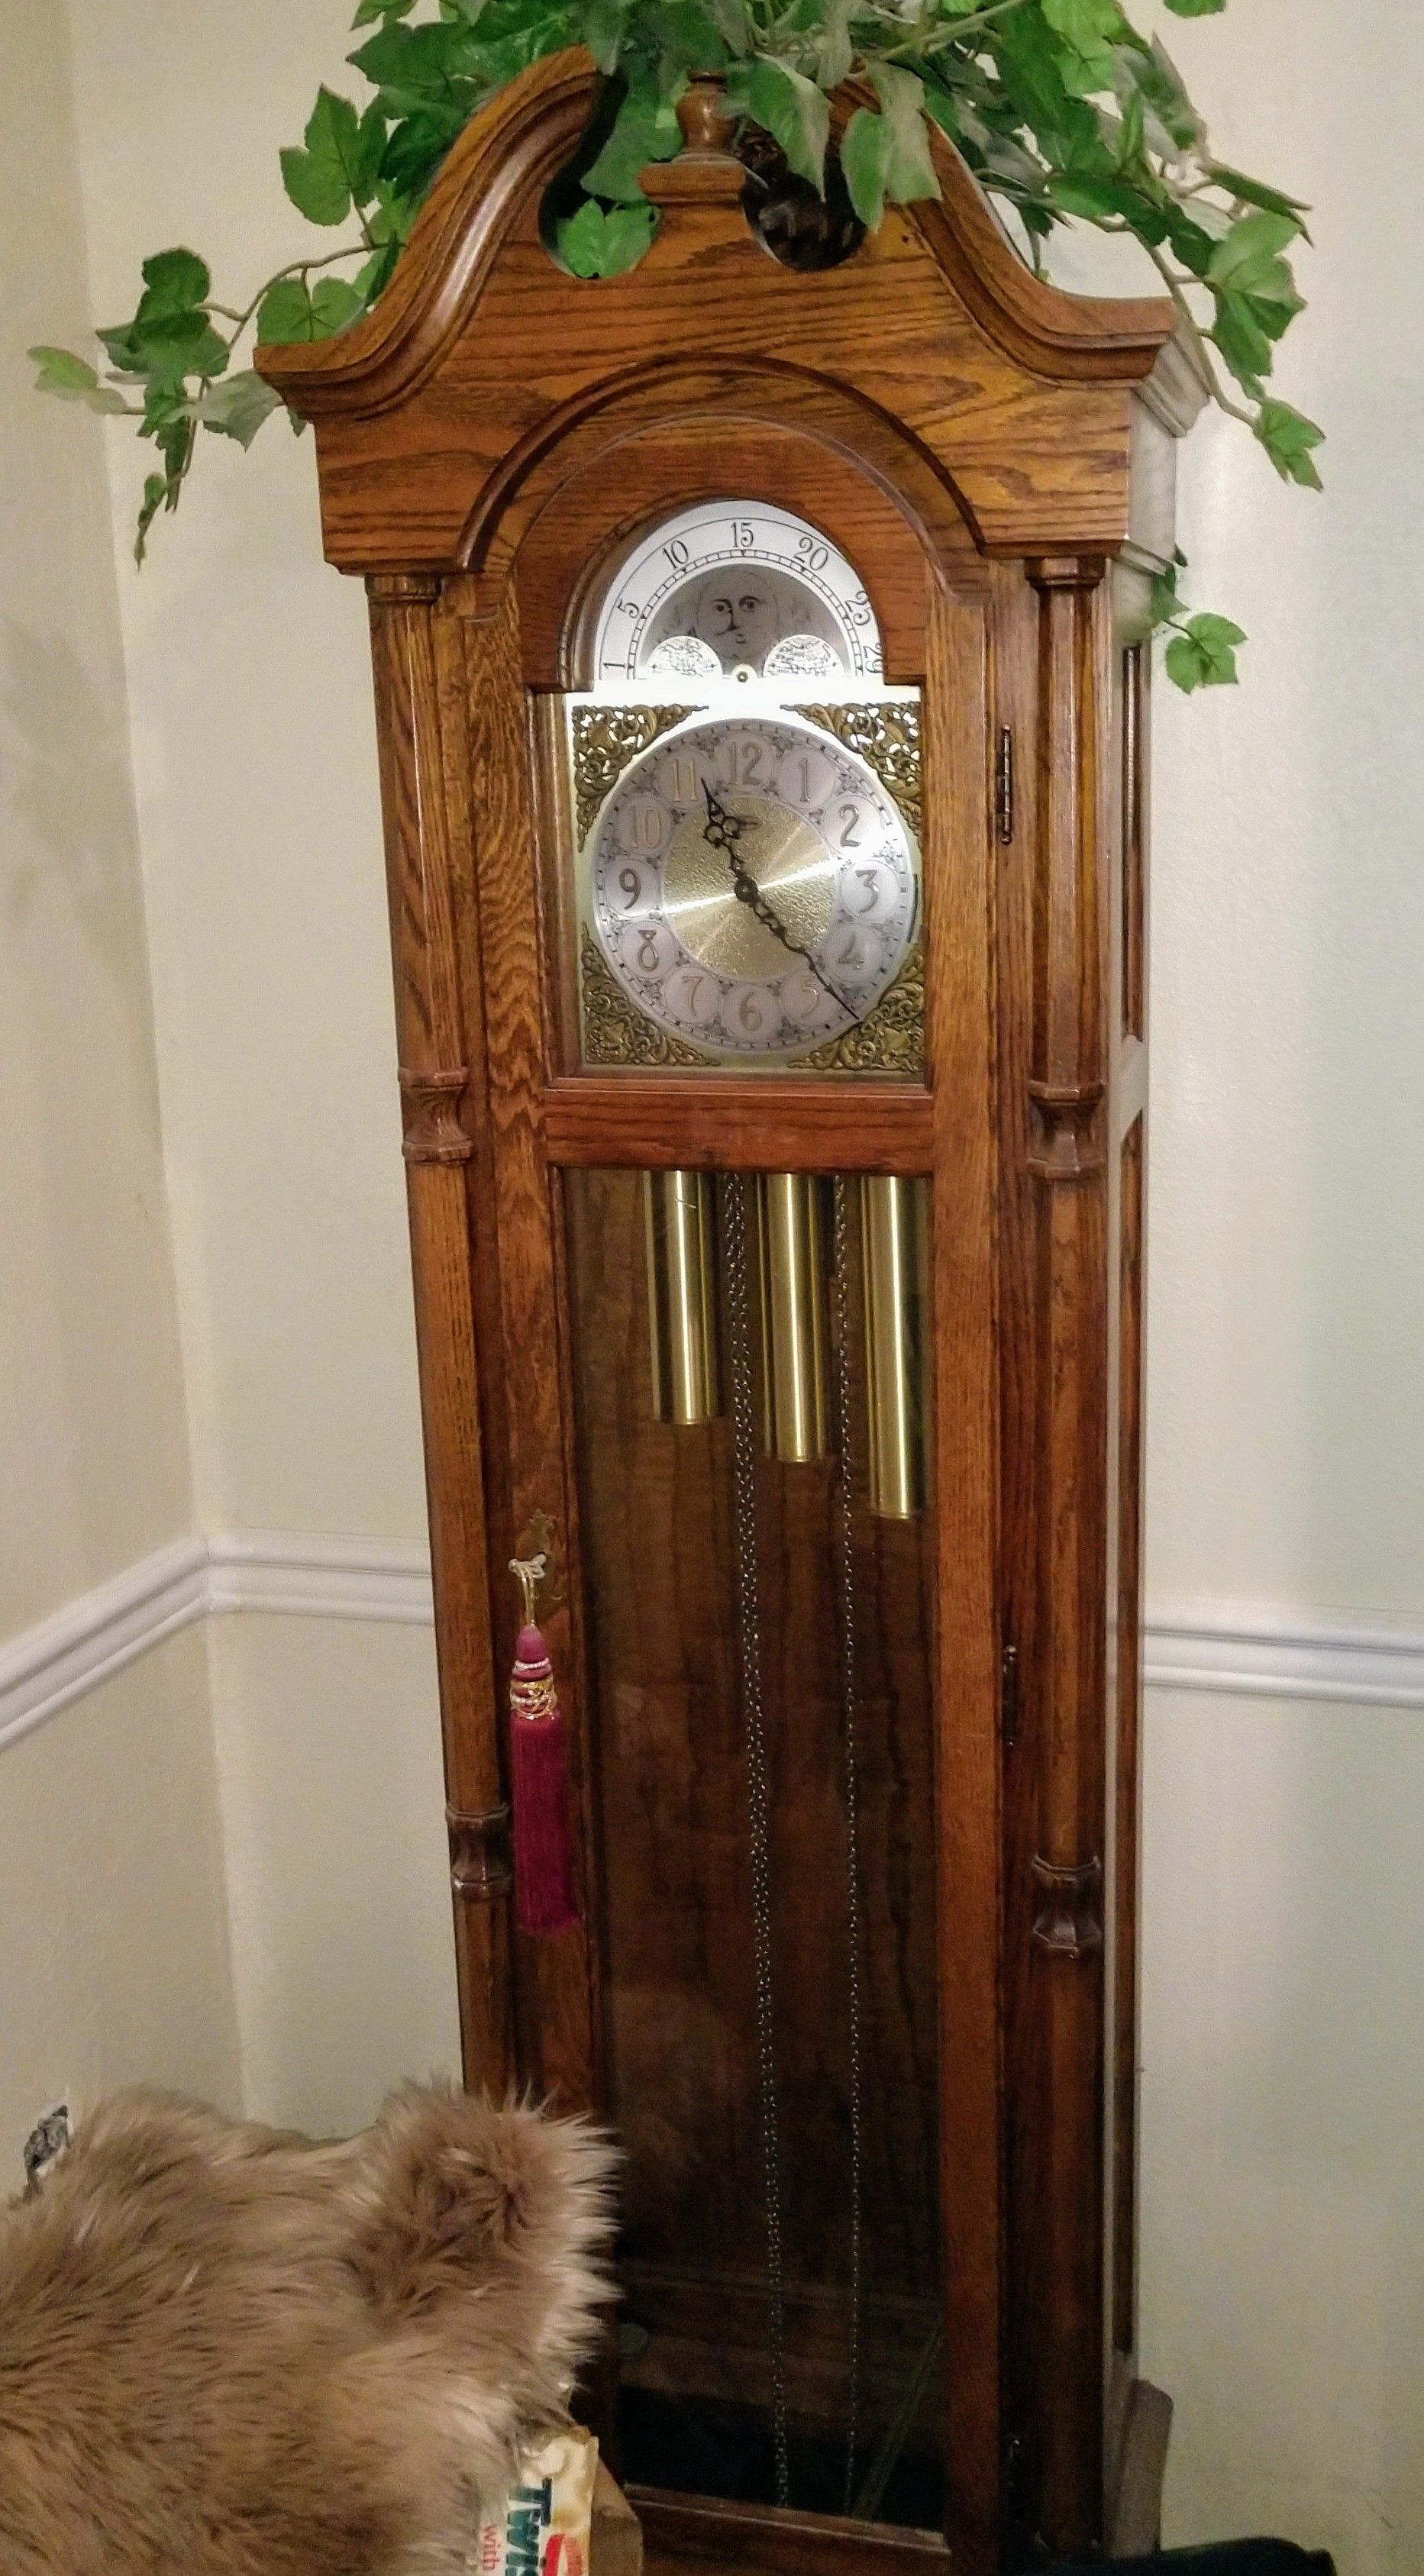 Beautiful vintage grandfather clock for sale!